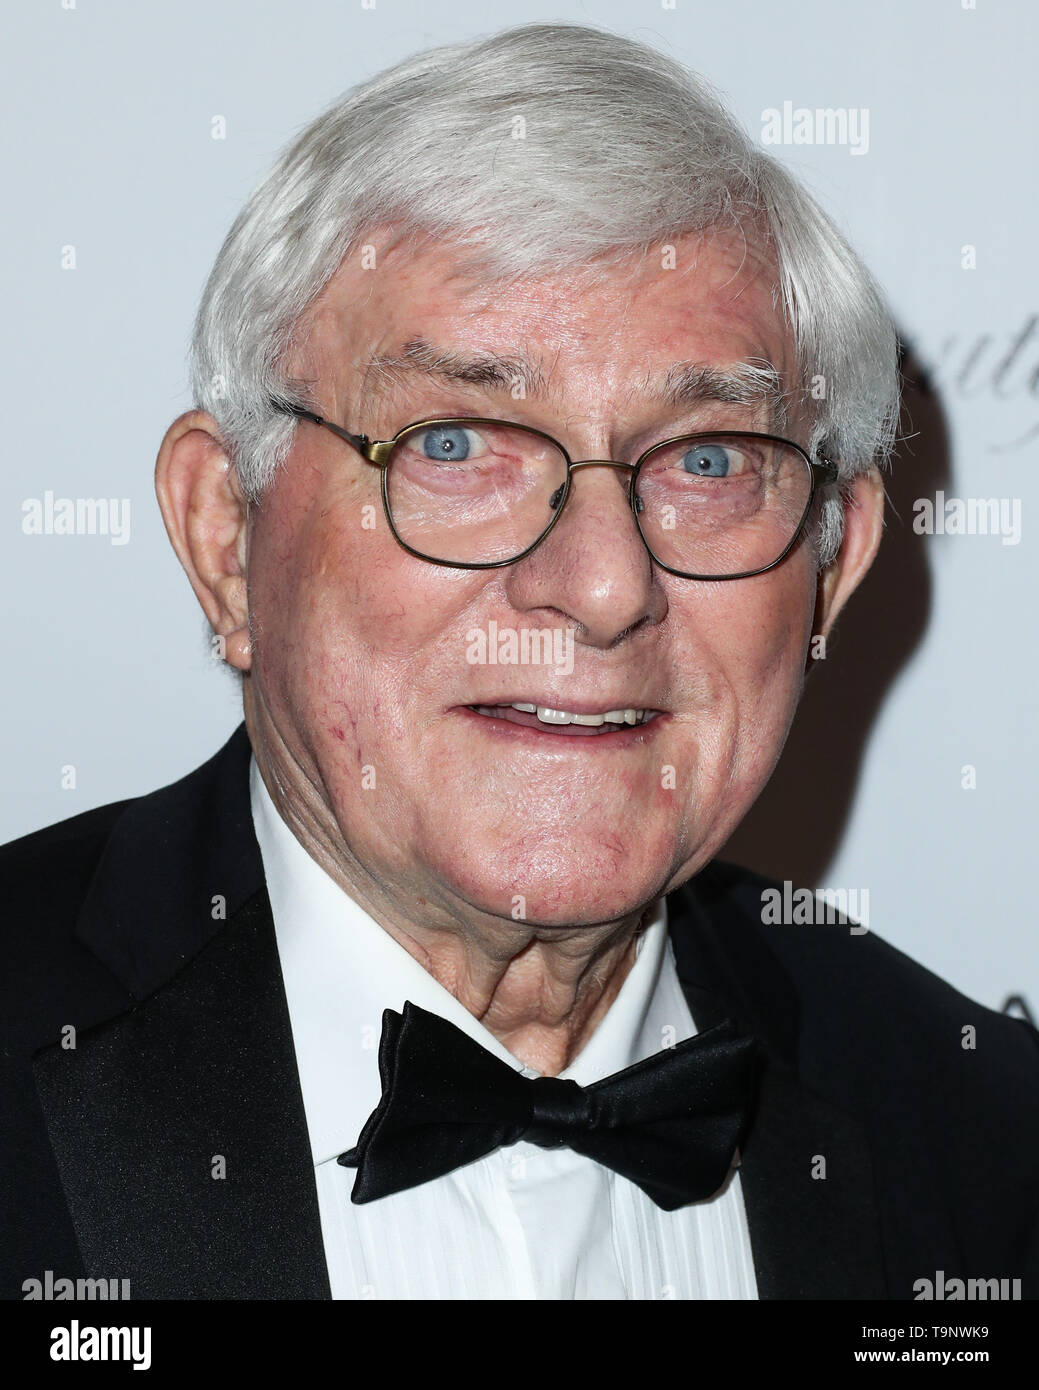 BEVERLY HILLS, LOS ANGELES, CA, USA - MAY 19: Phil Donahue arrives at the 2019 American Icon Awards held at the Beverly Wilshire Four Seasons Hotel on May 19, 2019 in Beverly Hills, Los Angeles, California, United States. (Photo by Xavier Collin/Image Press Agency) Stock Photo